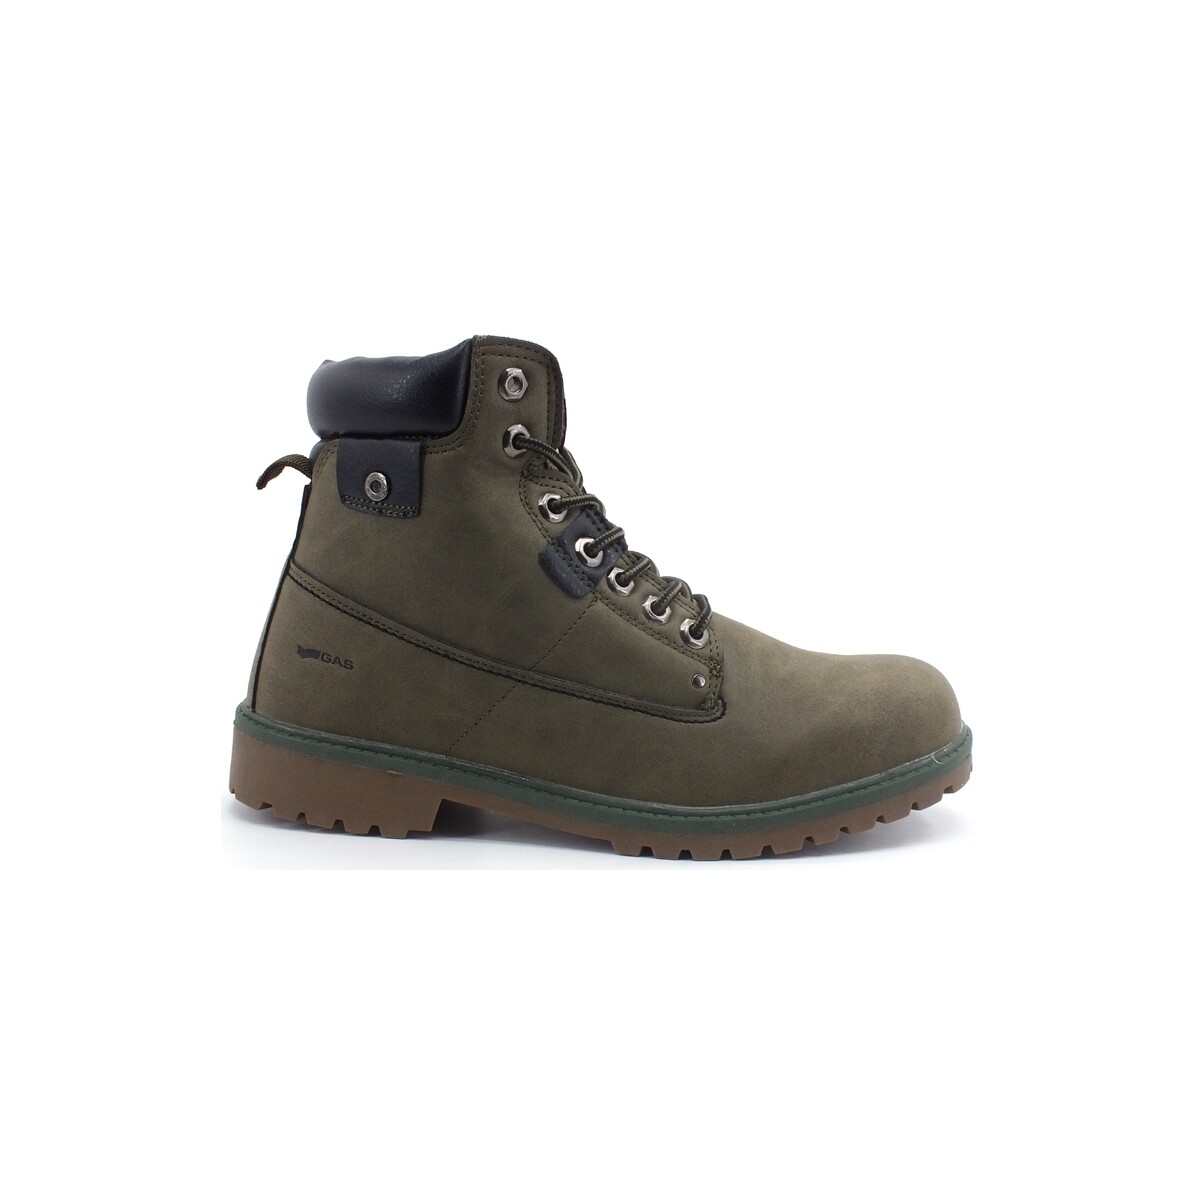 Chaussures Homme Multisport Gas Nevada Stivaletto Polacco Lacci Military Green GAM921050 Vert